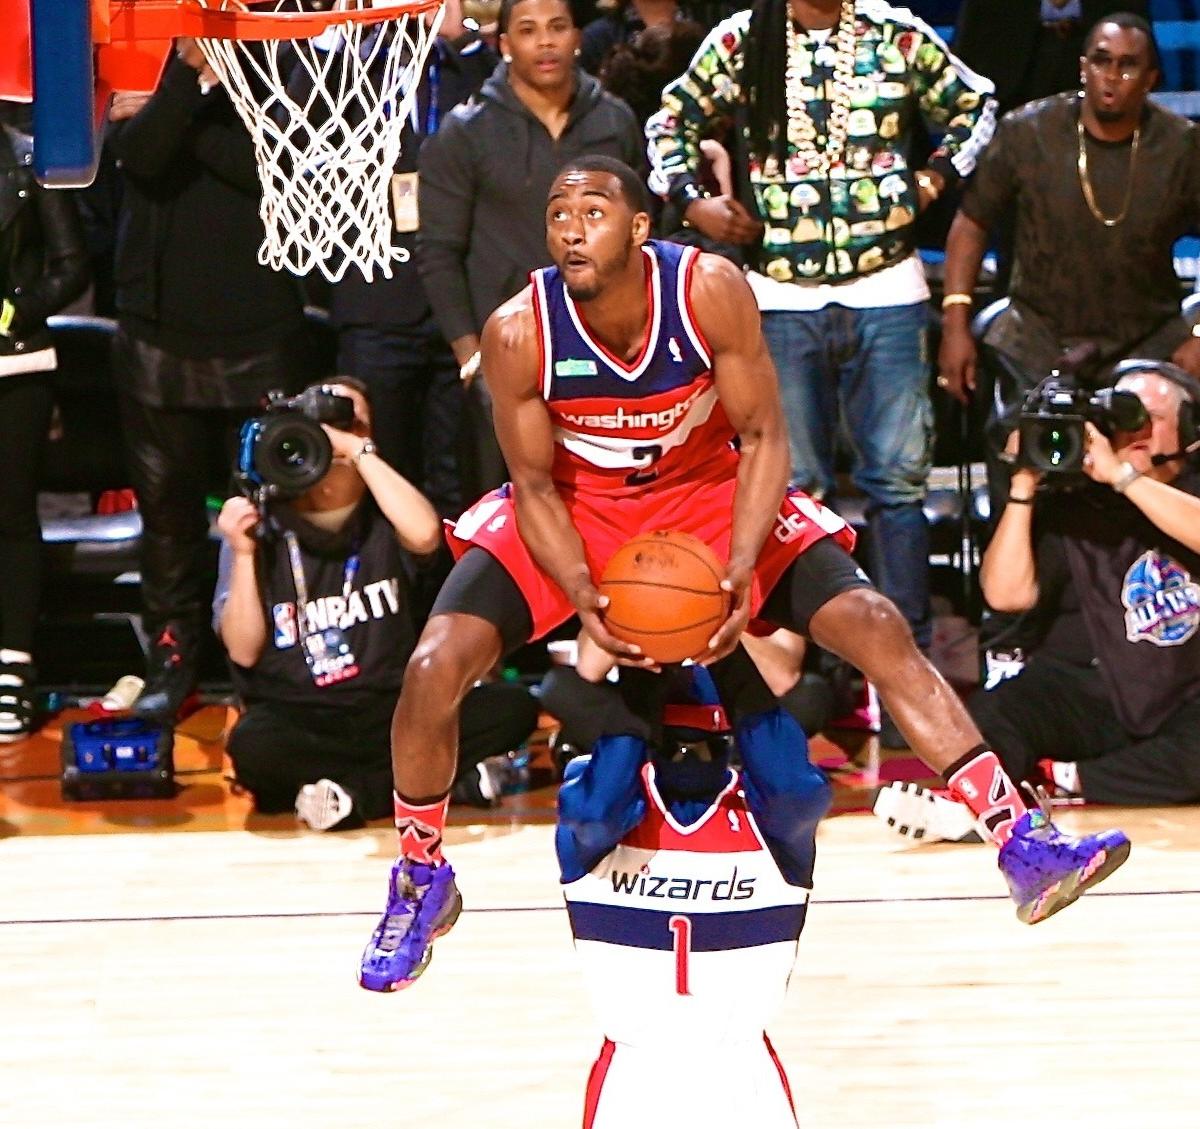 The Complete History of NBA Slam Dunk Champions and the Shoes They